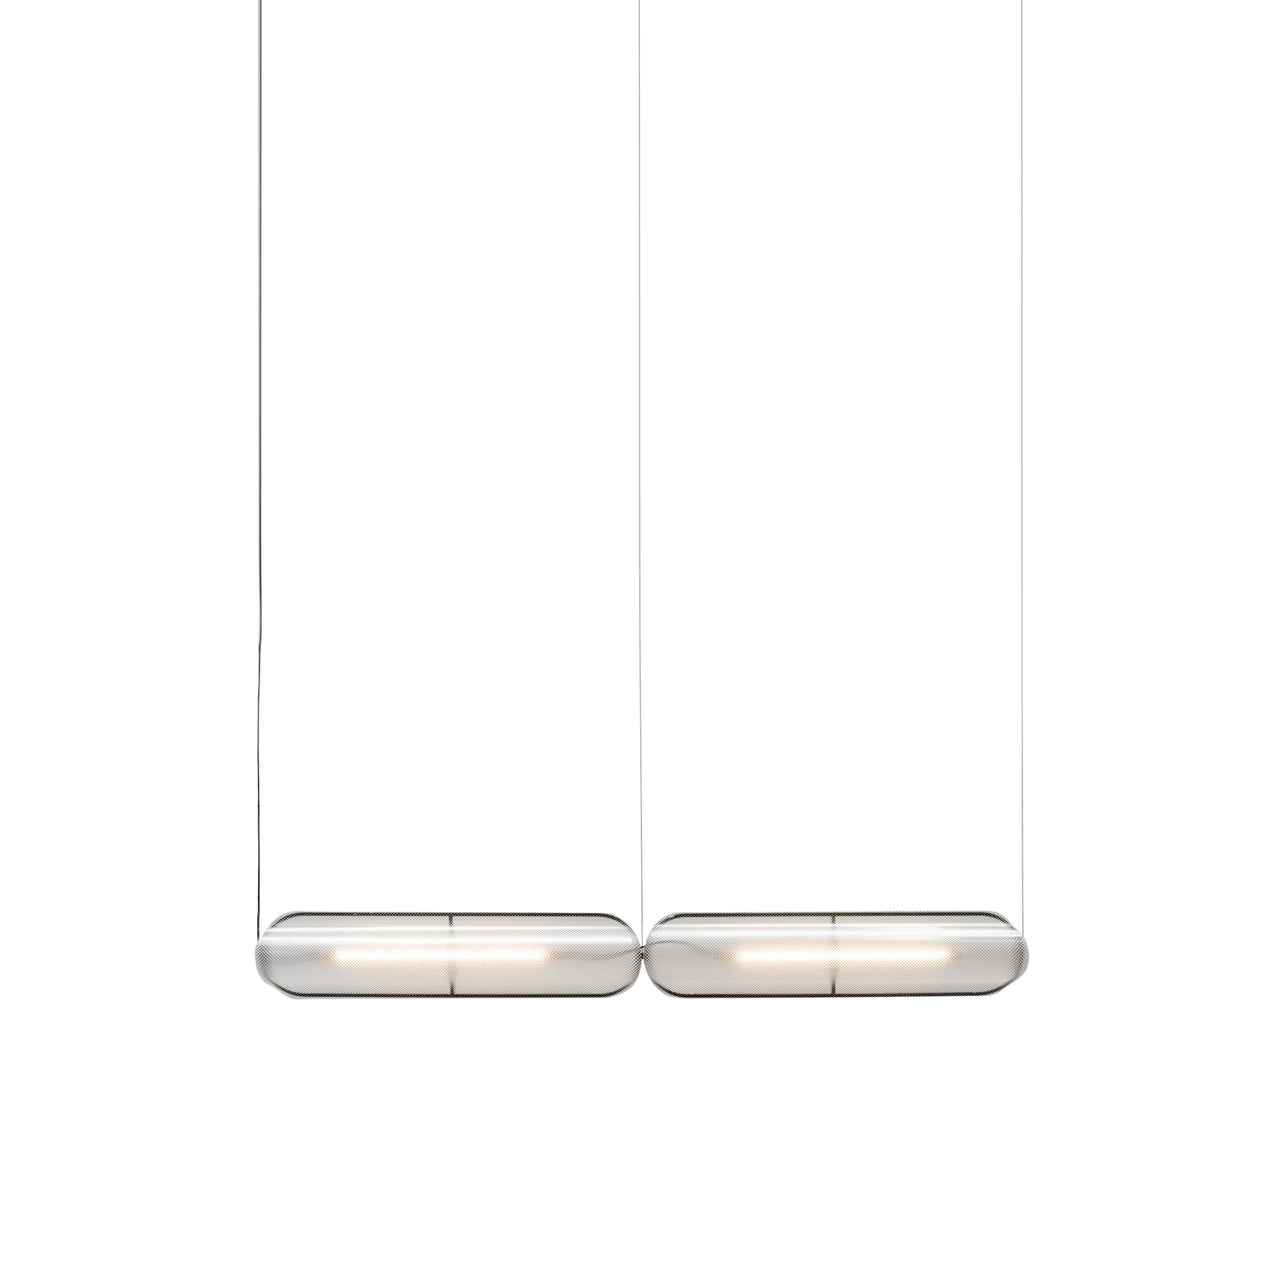 Vale System Y-Axis Pendant Light: Horizontal + End-to-End: Vale 2